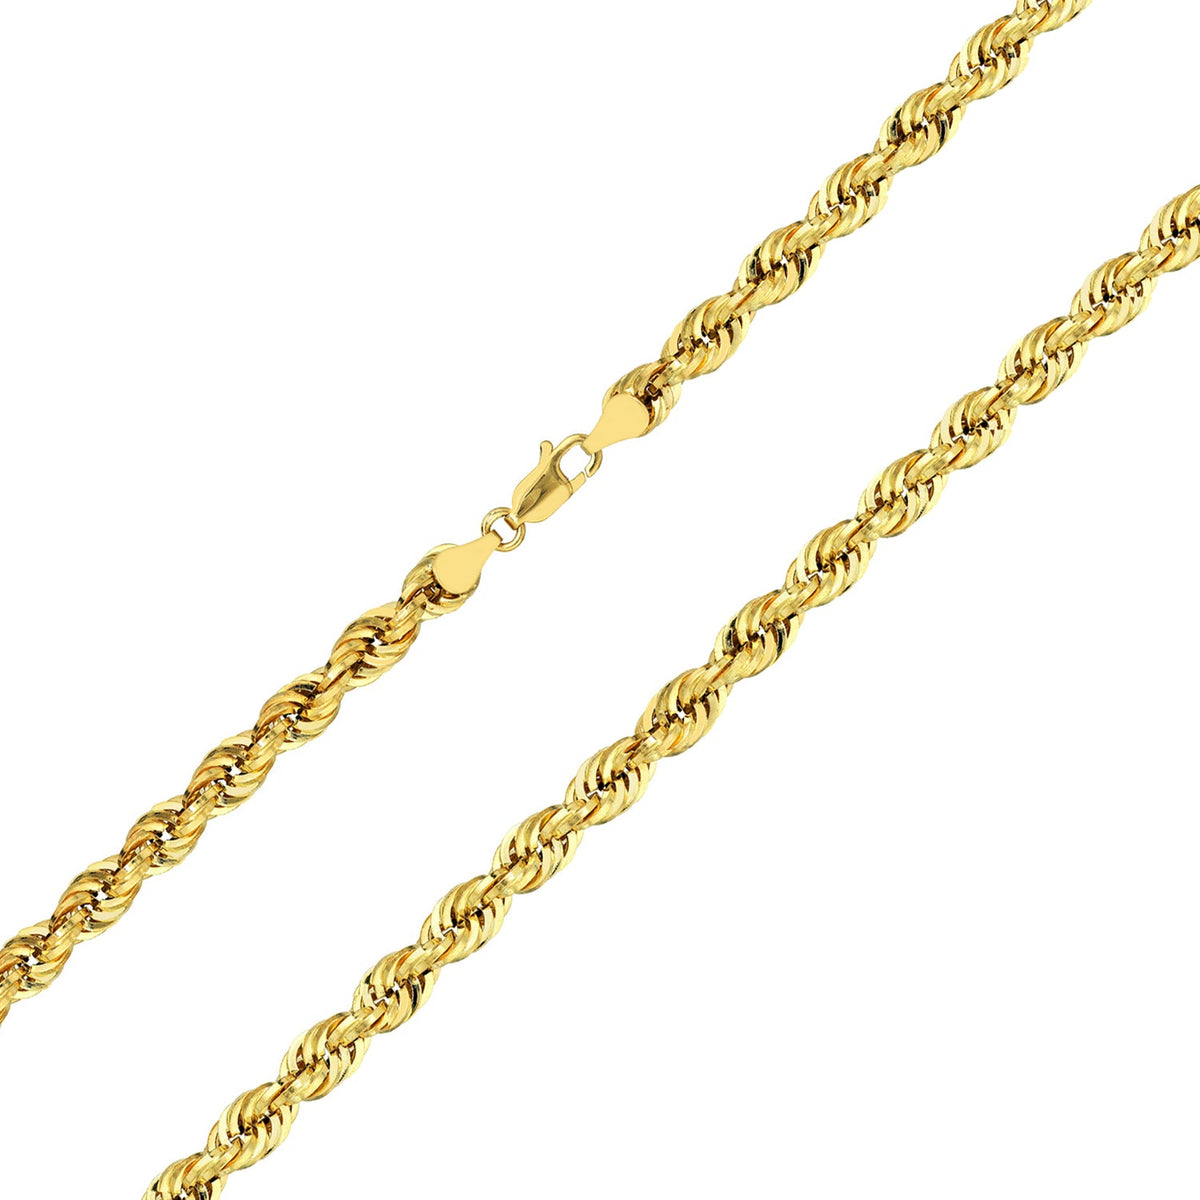 Solid 14k Yellow Gold 3mm Rope Chain Necklace with Lobster Lock - Diamond-Cut